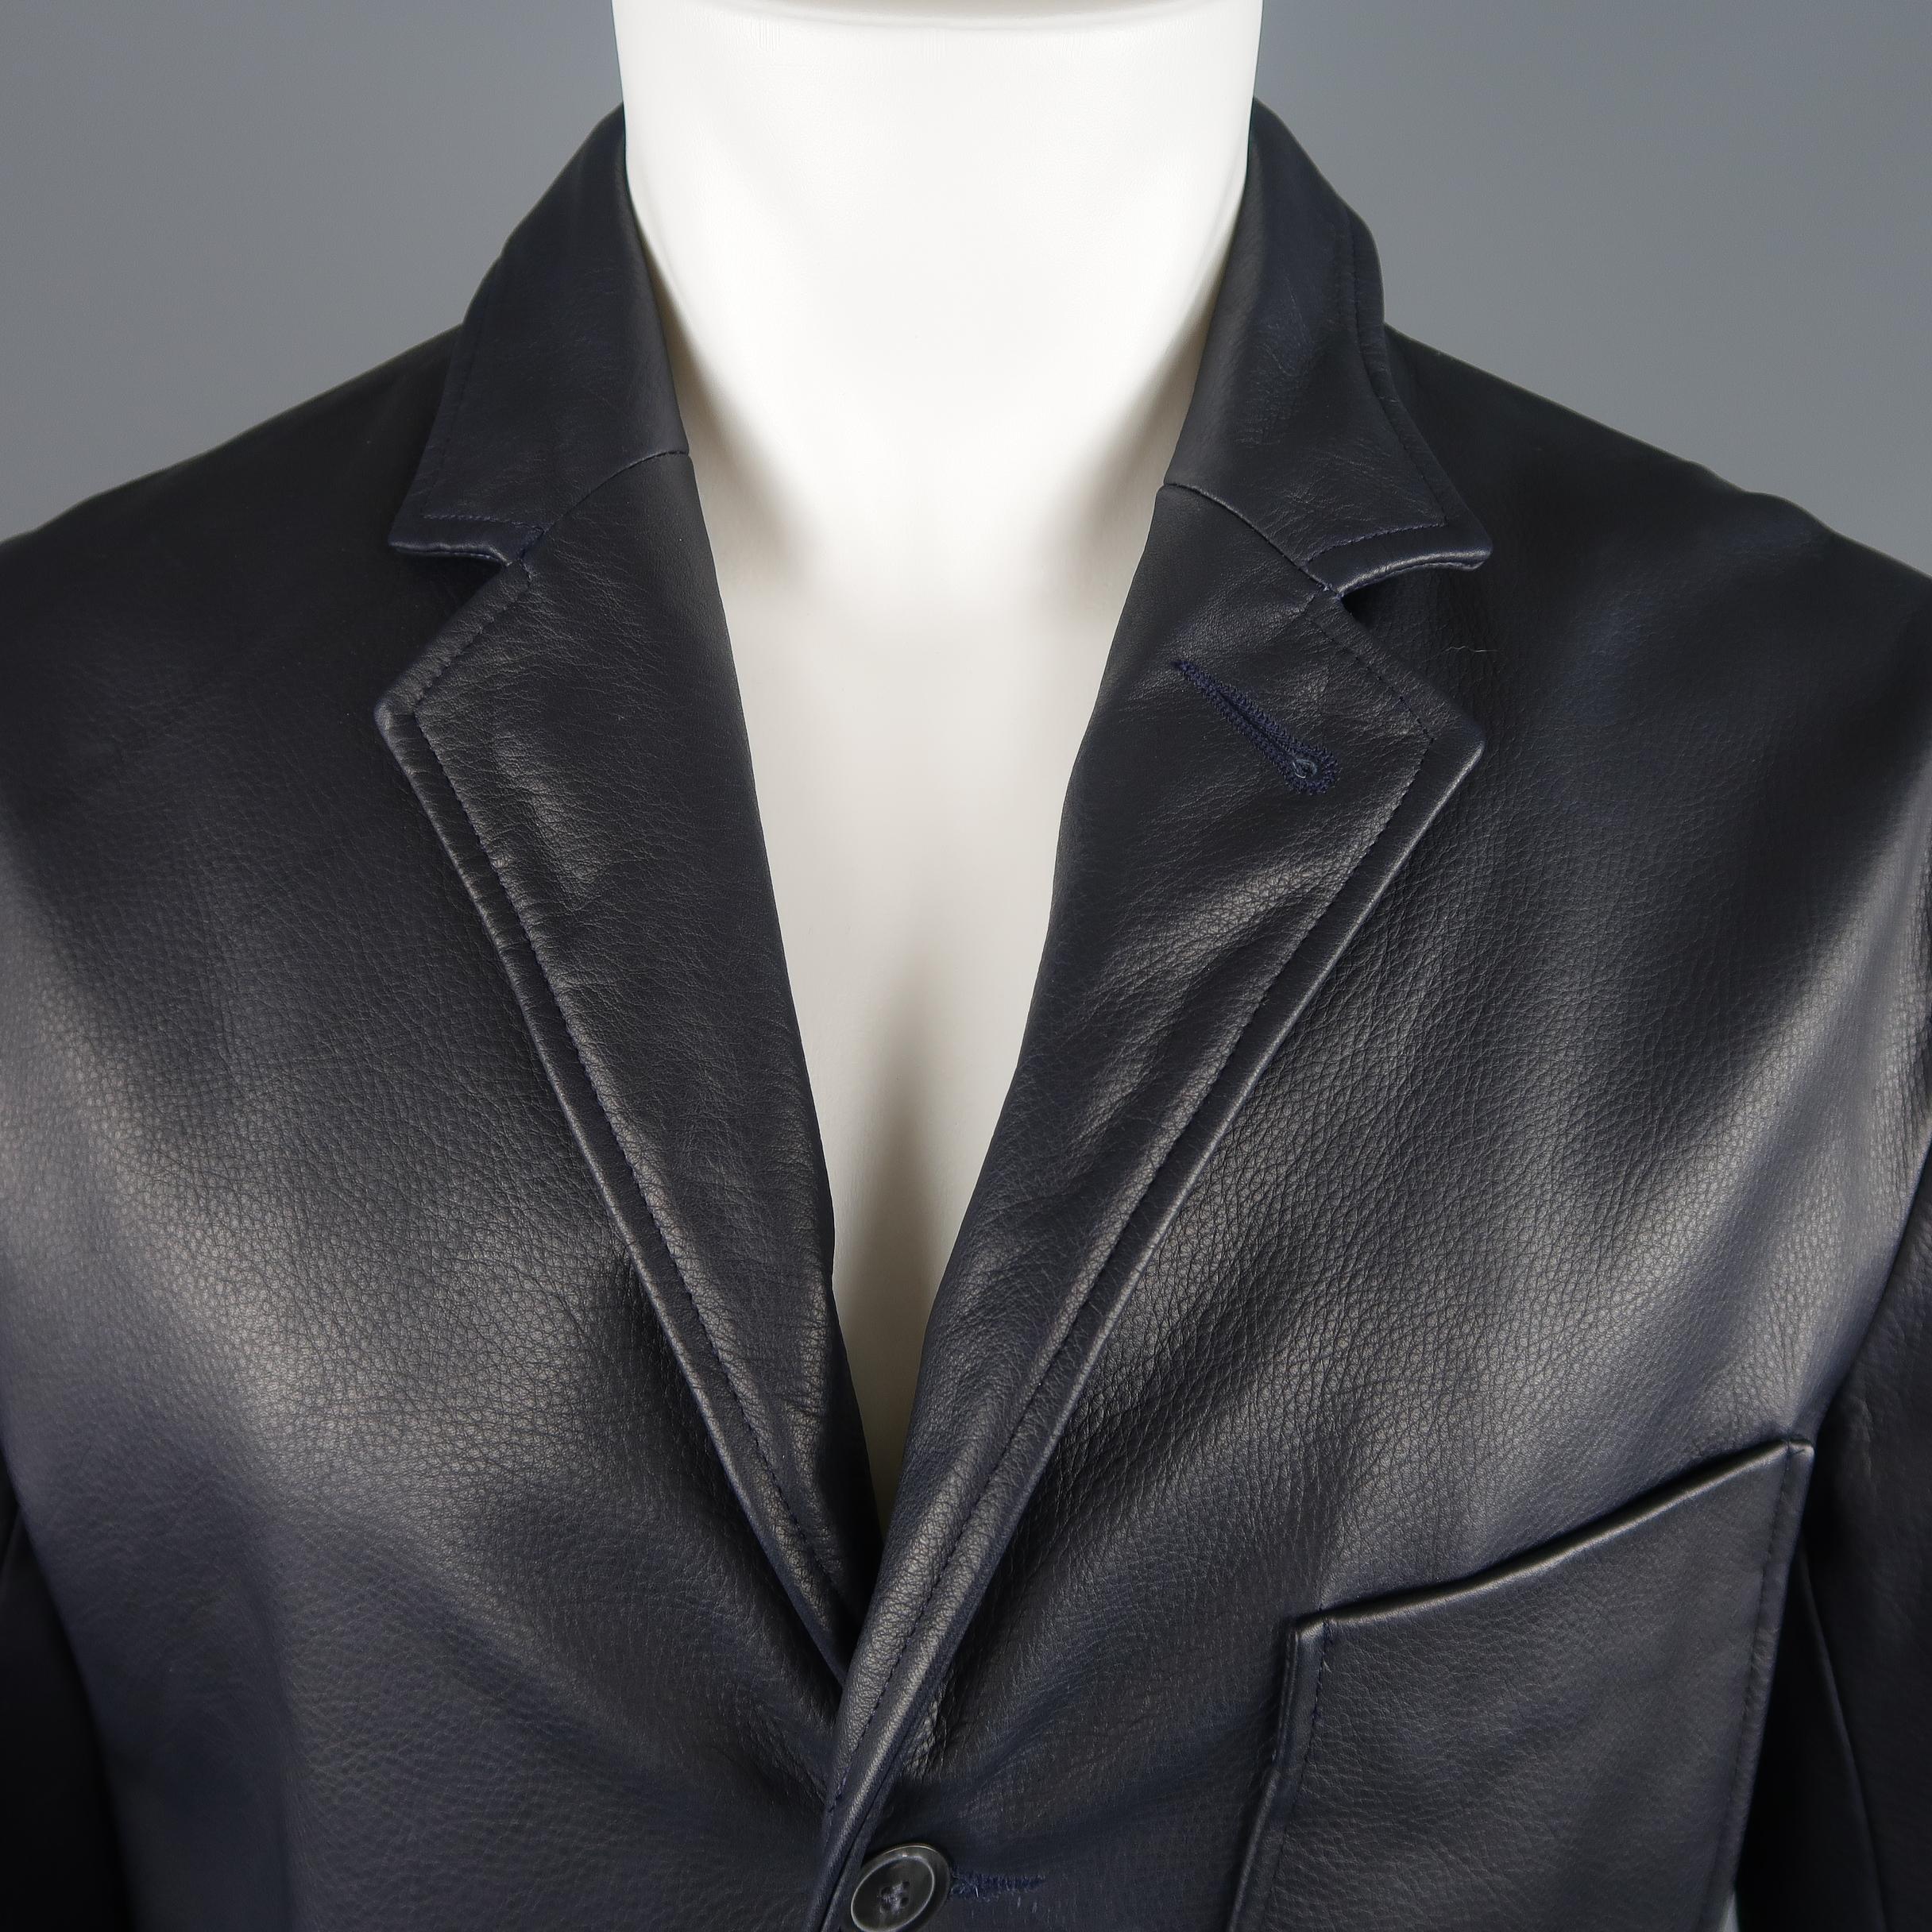 UNIONMADE X GOLDEN BEAR jacket comes in navy textured leather with a notch lapel, three button front, and patch pockets. Made in USA.
 
Excellent Pre-Owned Condition.
Marked: L
 
Measurements:
 
Shoulder: 20 in.
Chest: 46 in.
Sleeve: 26 in.
Length: